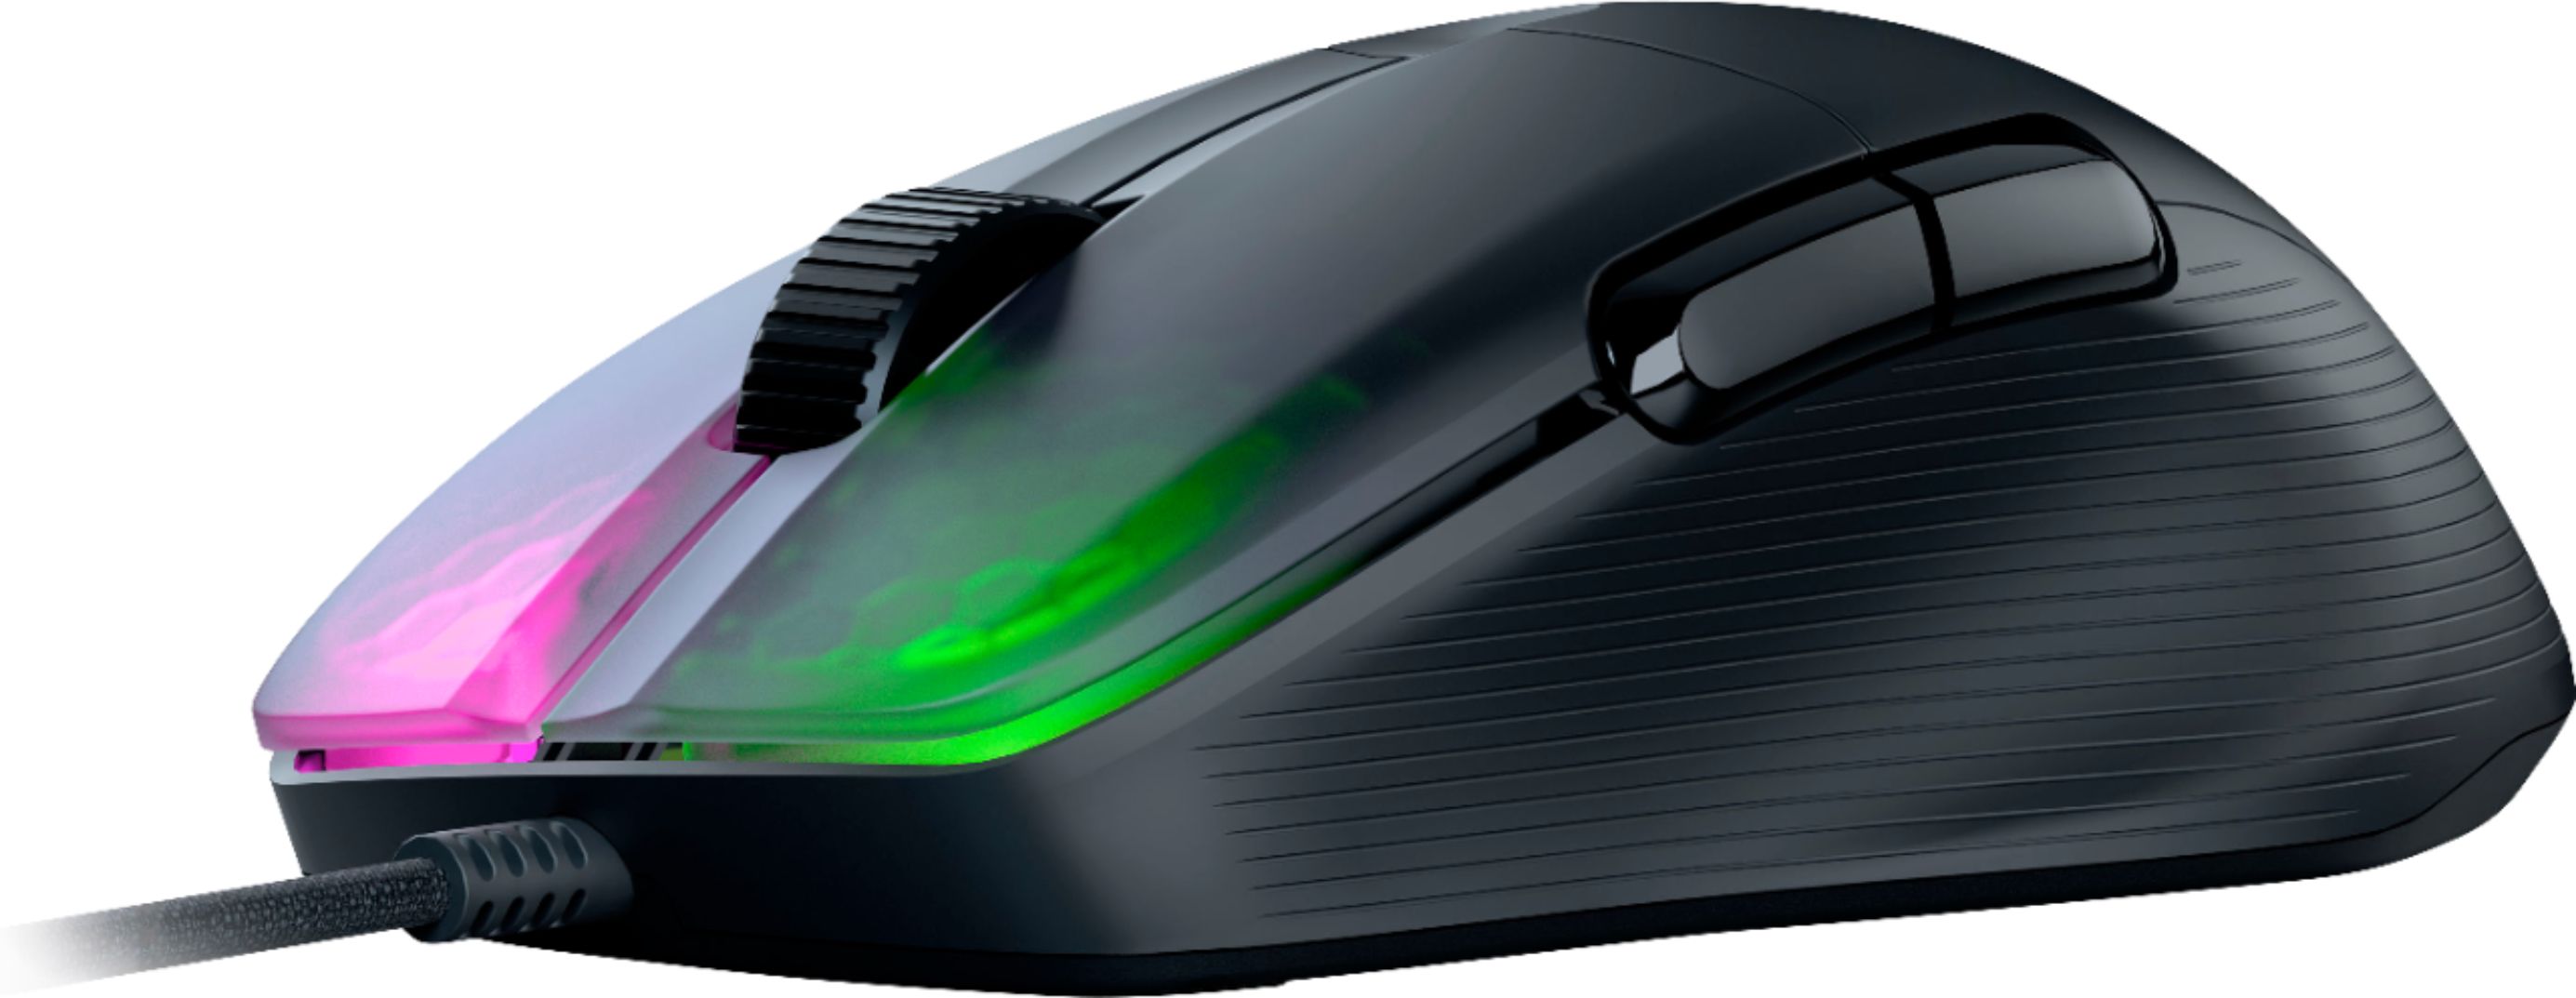 Roccat Kone Pro review: A near perfect iconic esports gaming mouse